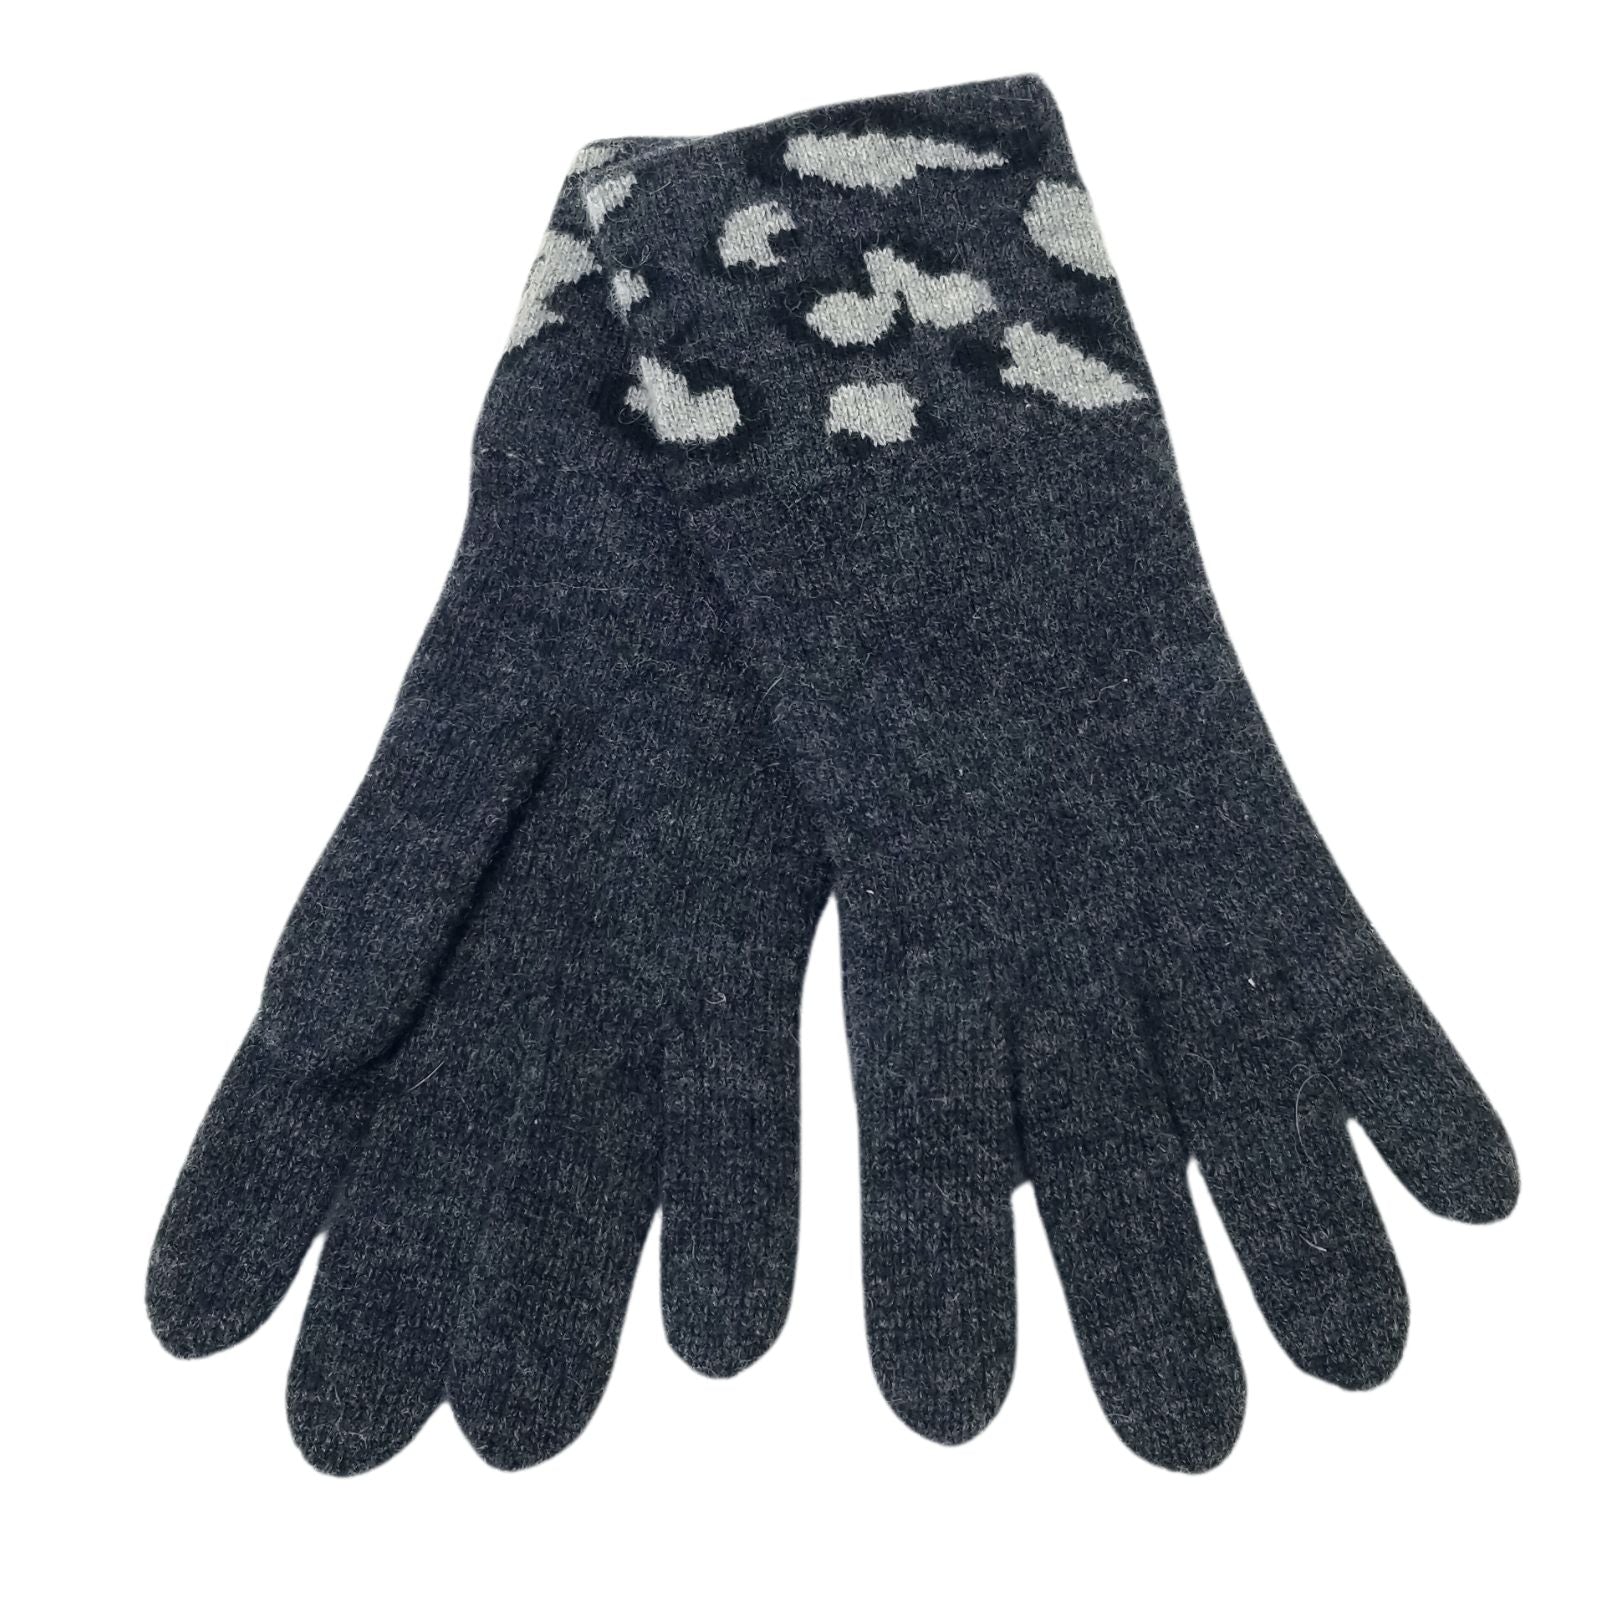 Cashmere glove with Animal Print Jacquard Cuff, HEATHER CHARCOAL